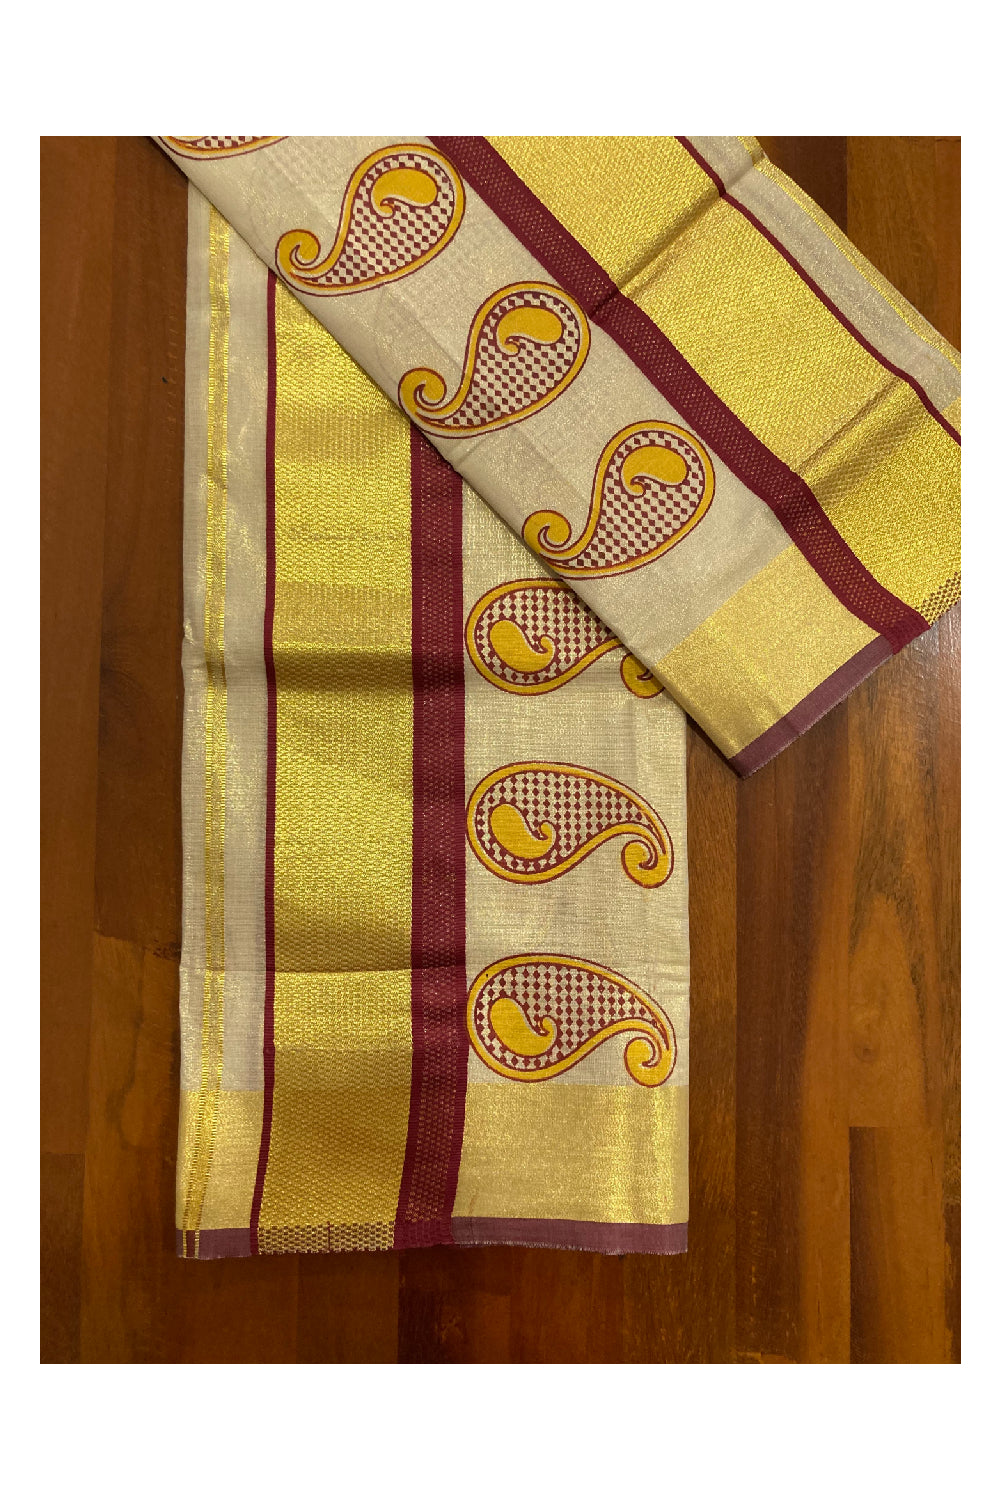 Tissue Set Mundu with Hand Block Printed Red and Yellow Peacock Design